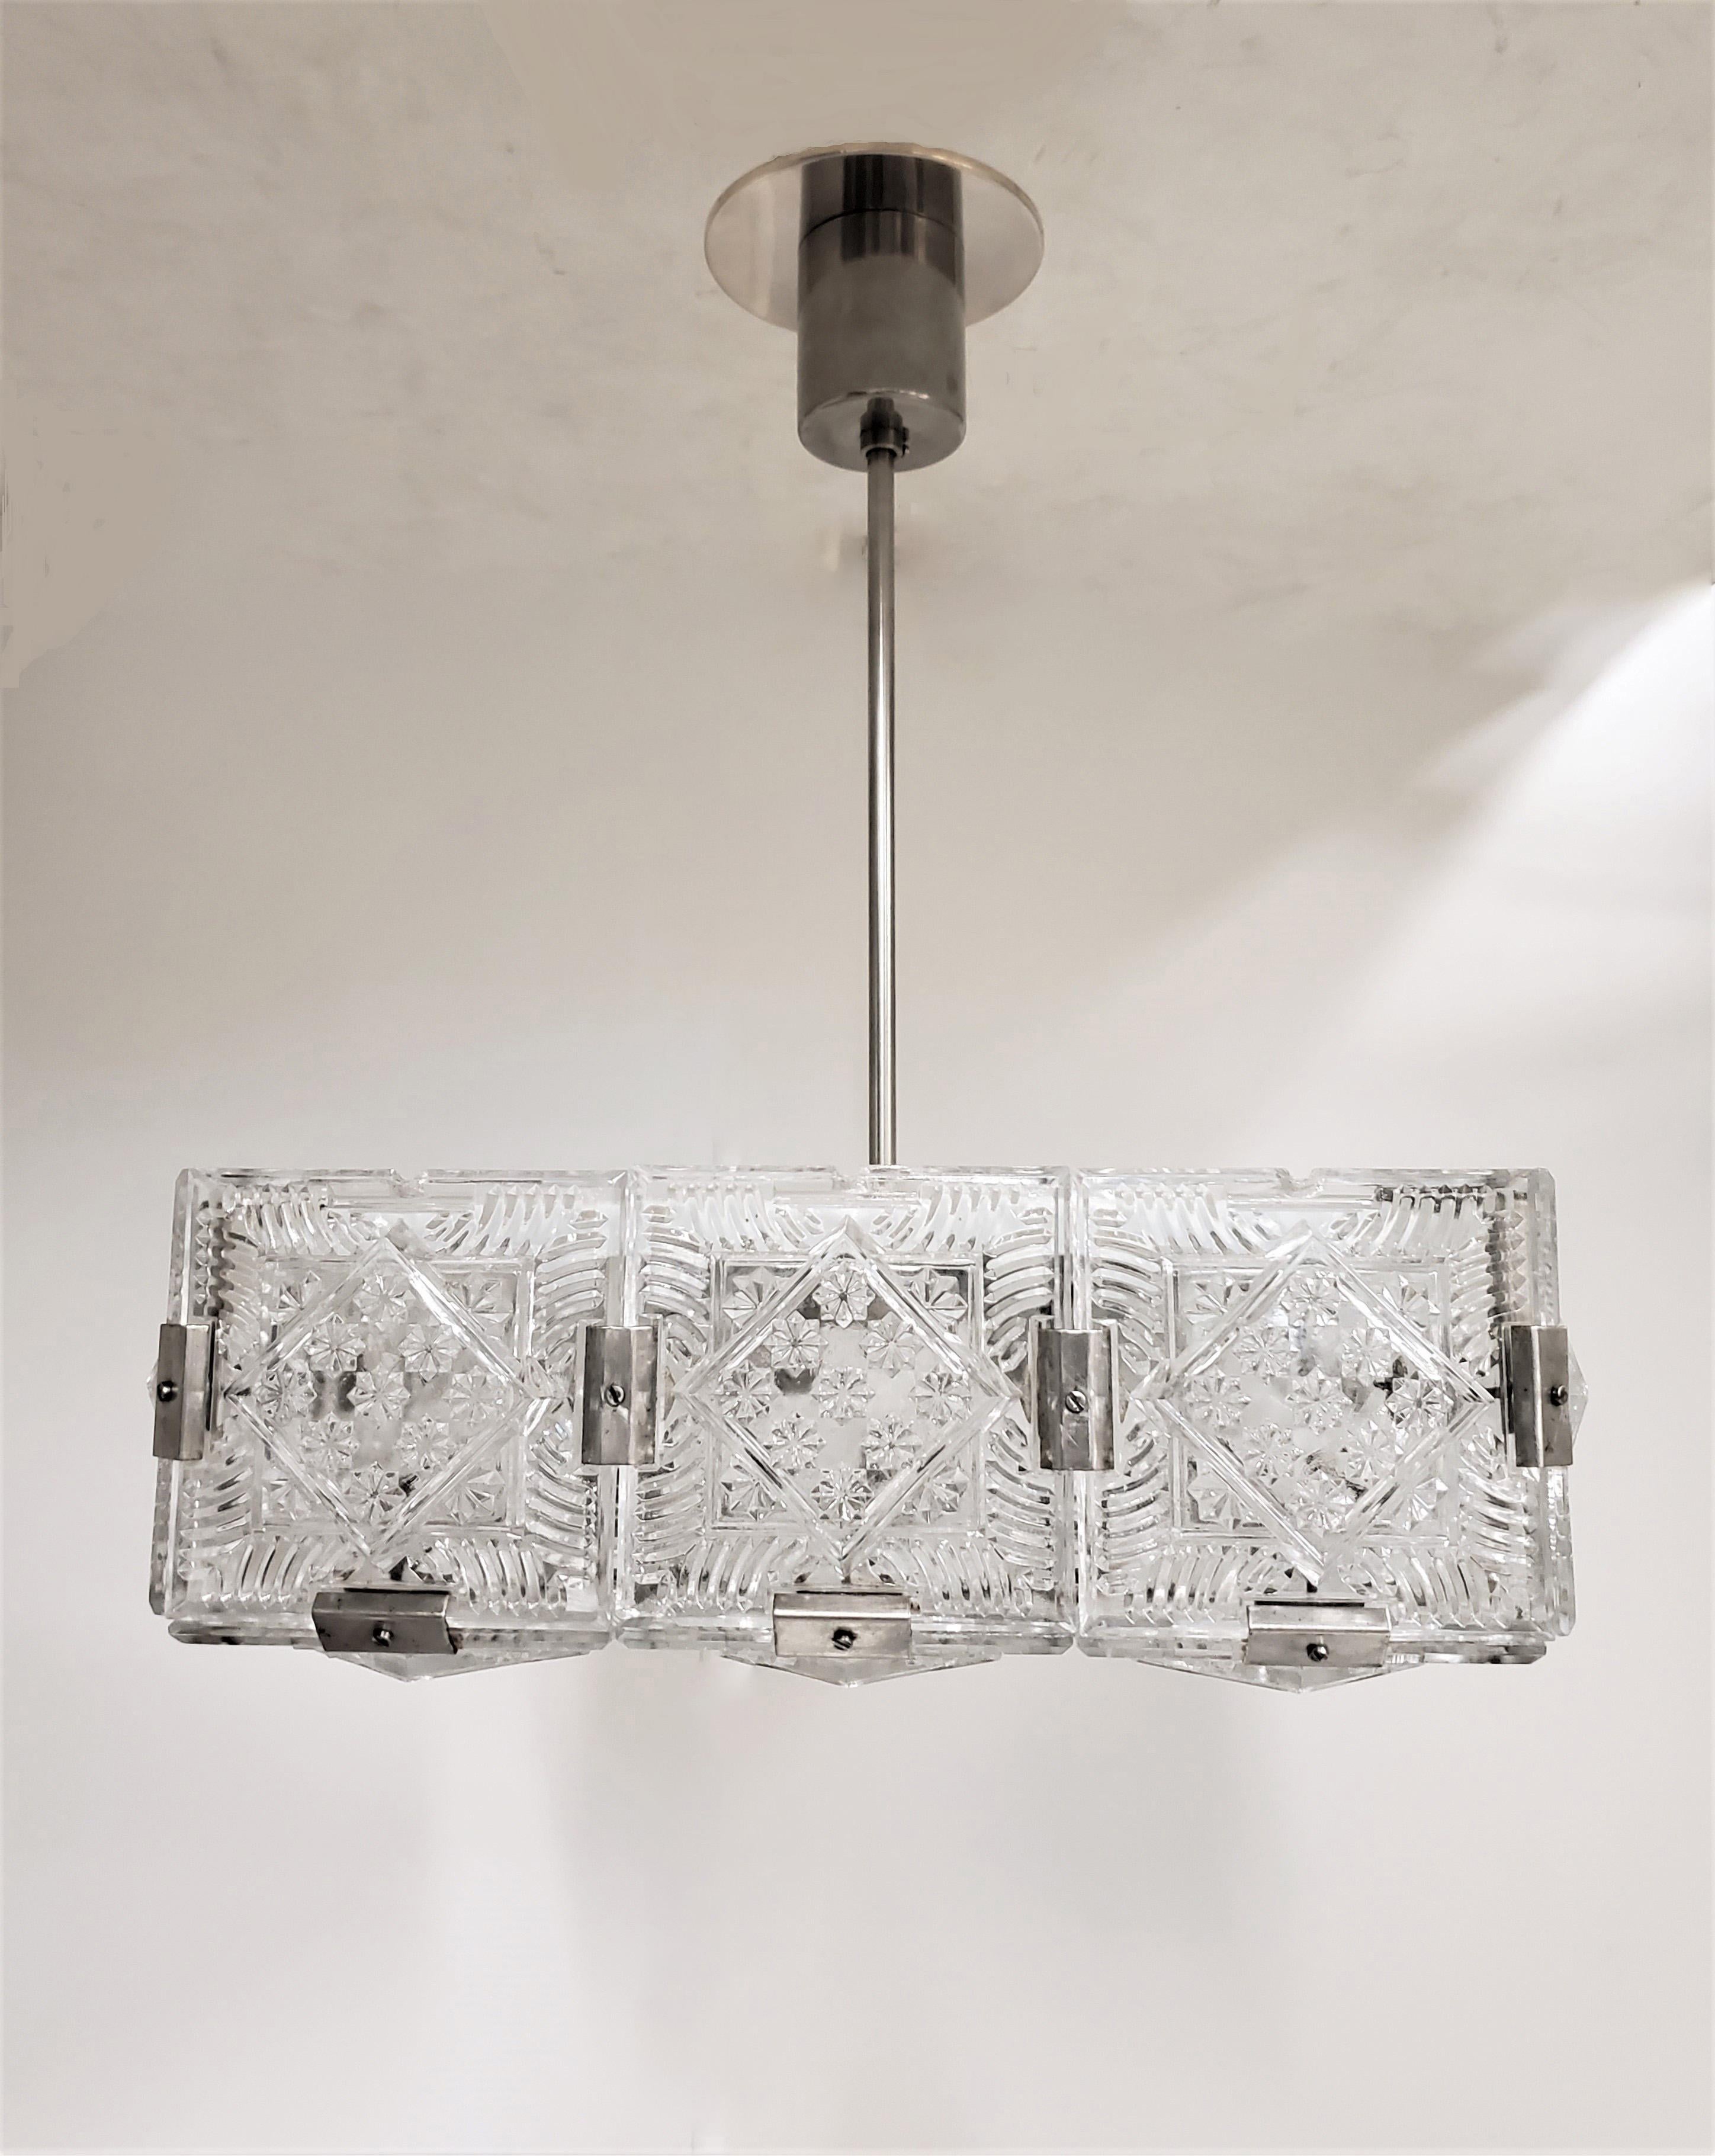 A pair of square Modernist pendant lights comprising small glass elements formed together with original nickeled bronze brackets into a single square unit and supported by a round canopy with rod stem. The juxtaposition of the linear and geometric